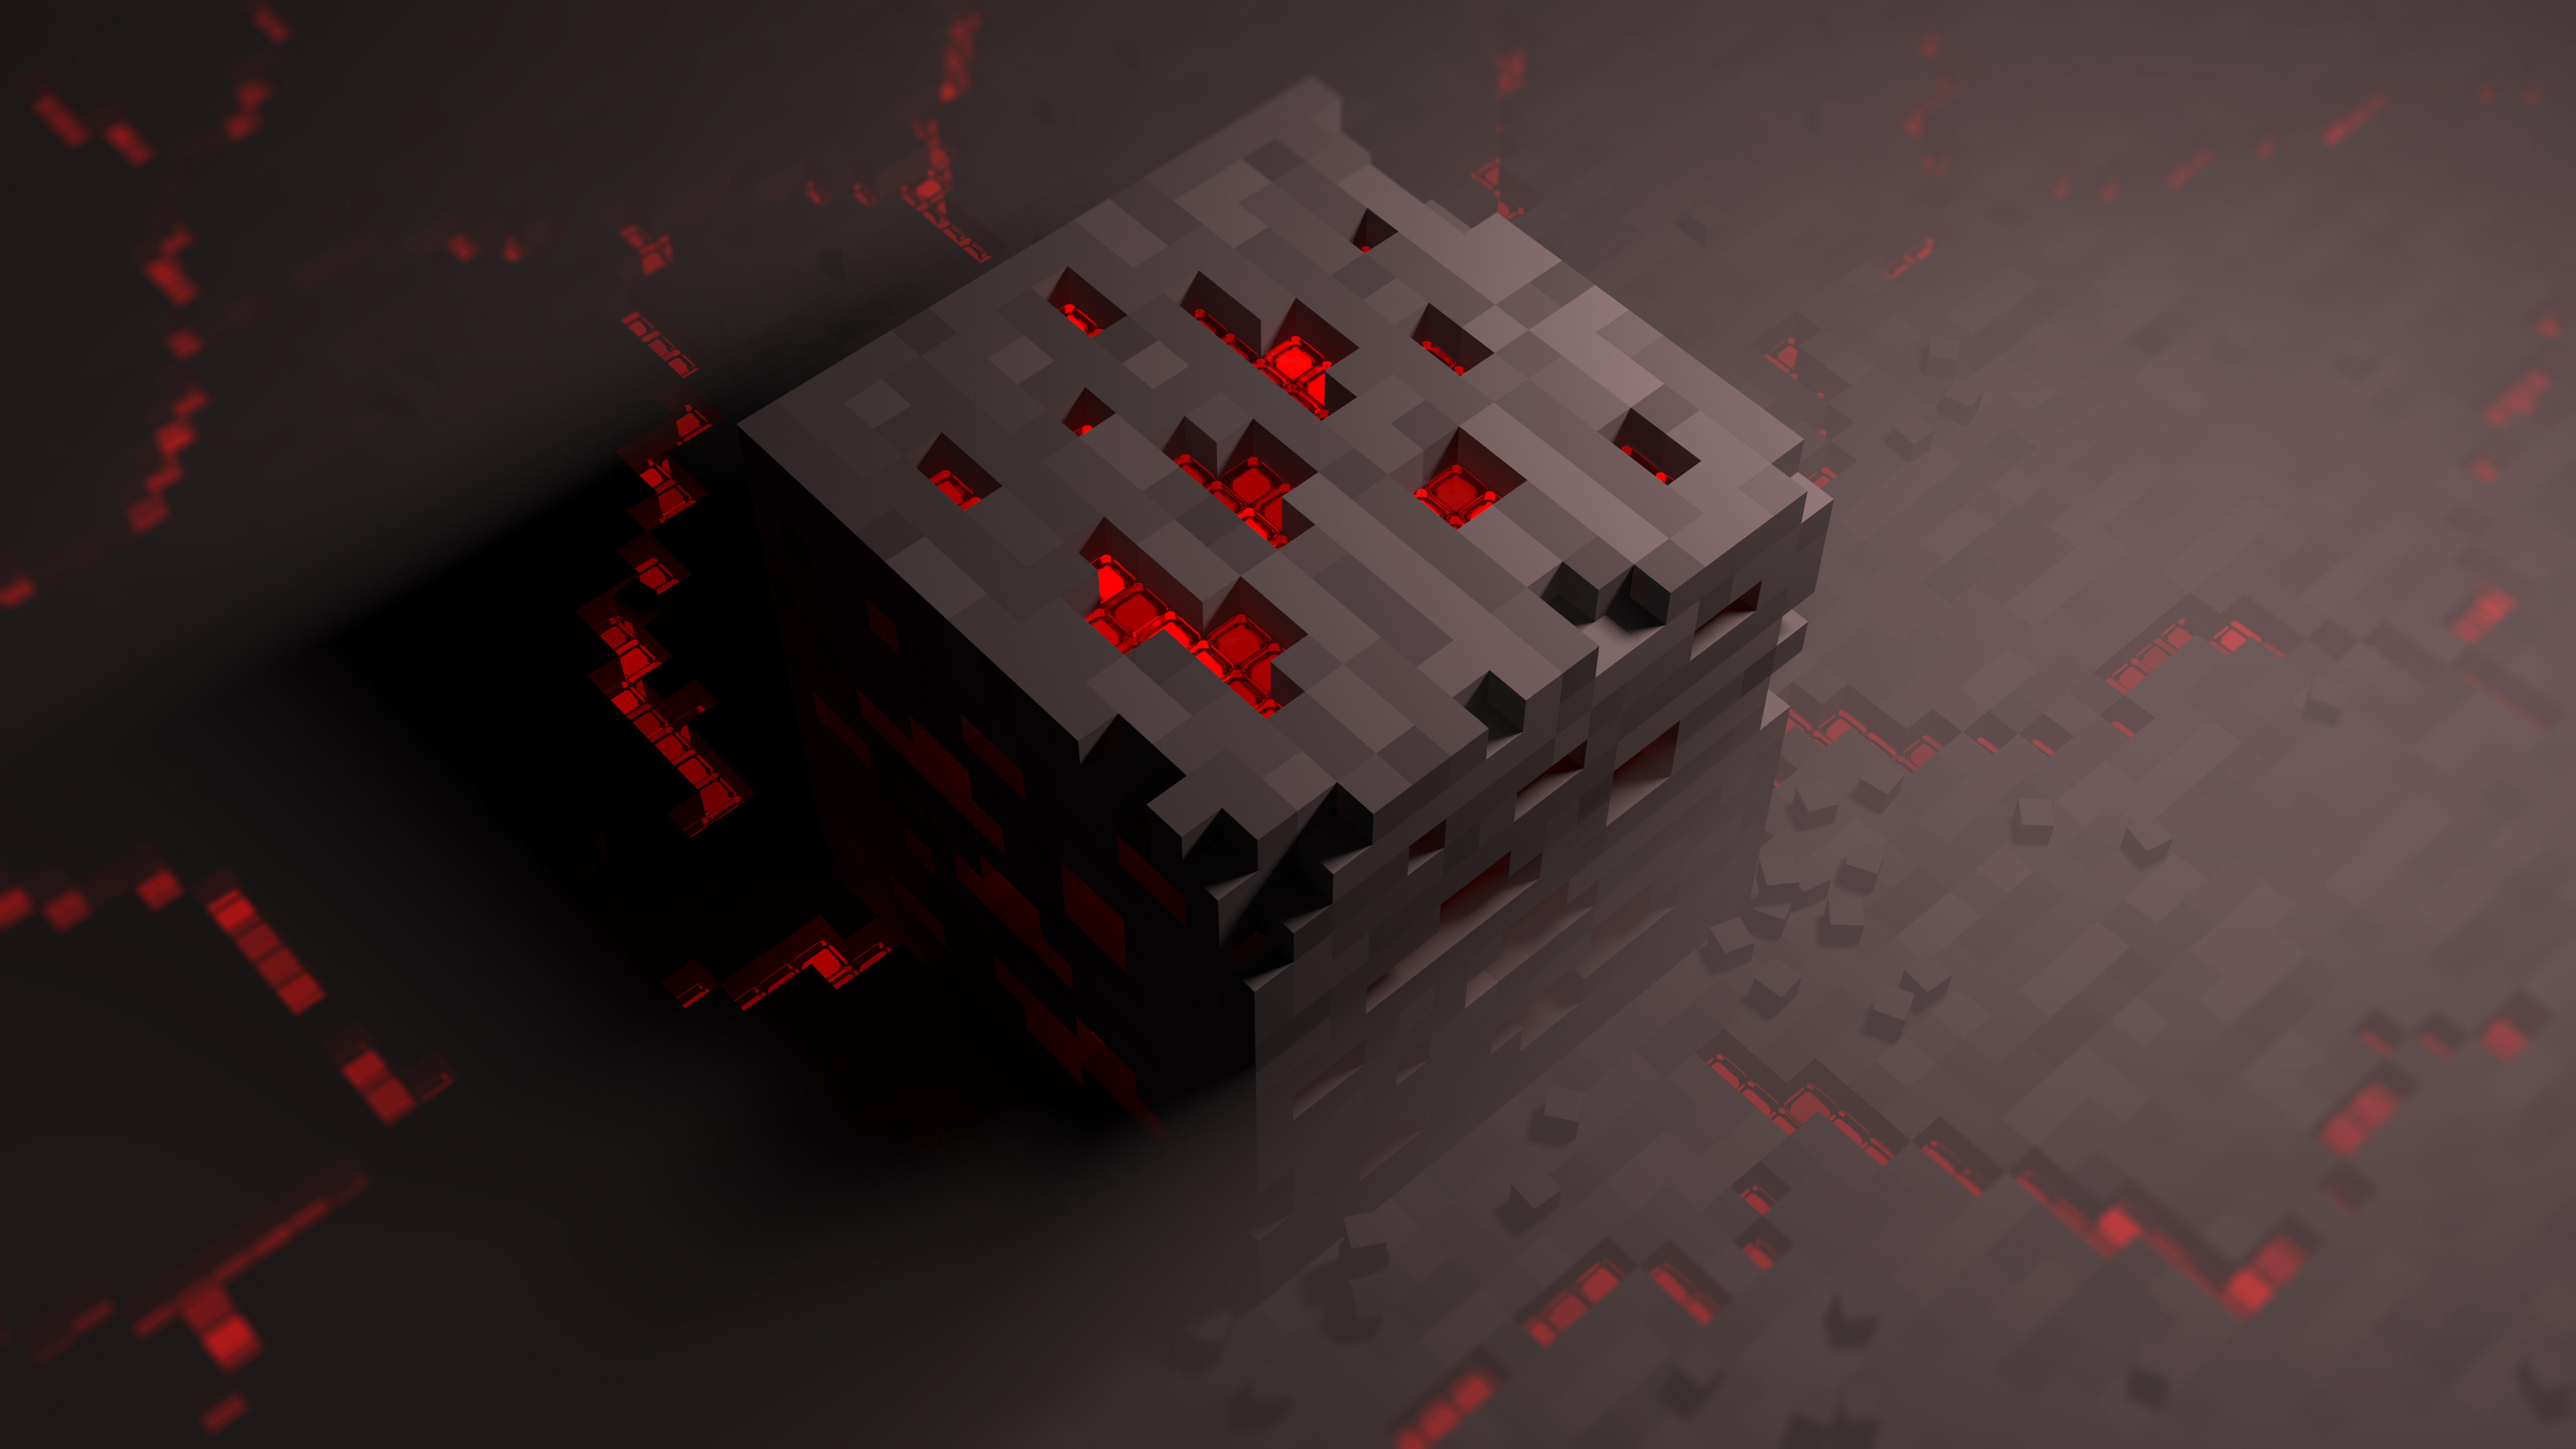 Download Wallpaper minecraft red stone ray tracing 5k 4k, 5120x2880